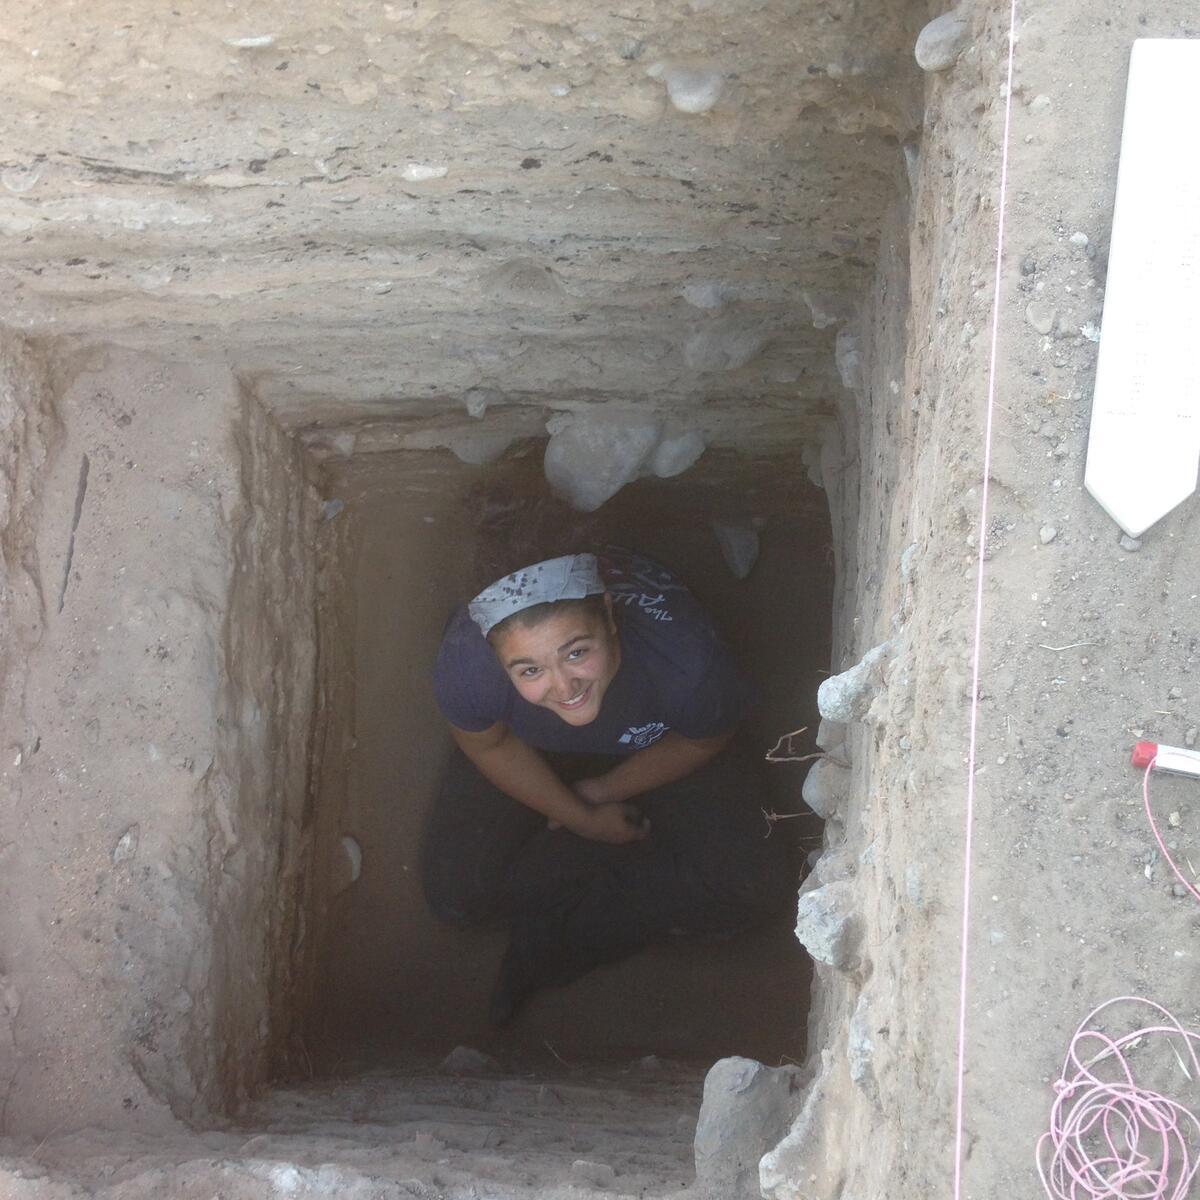 Person sitting in deep, square hole while looking up at camera, smiling.